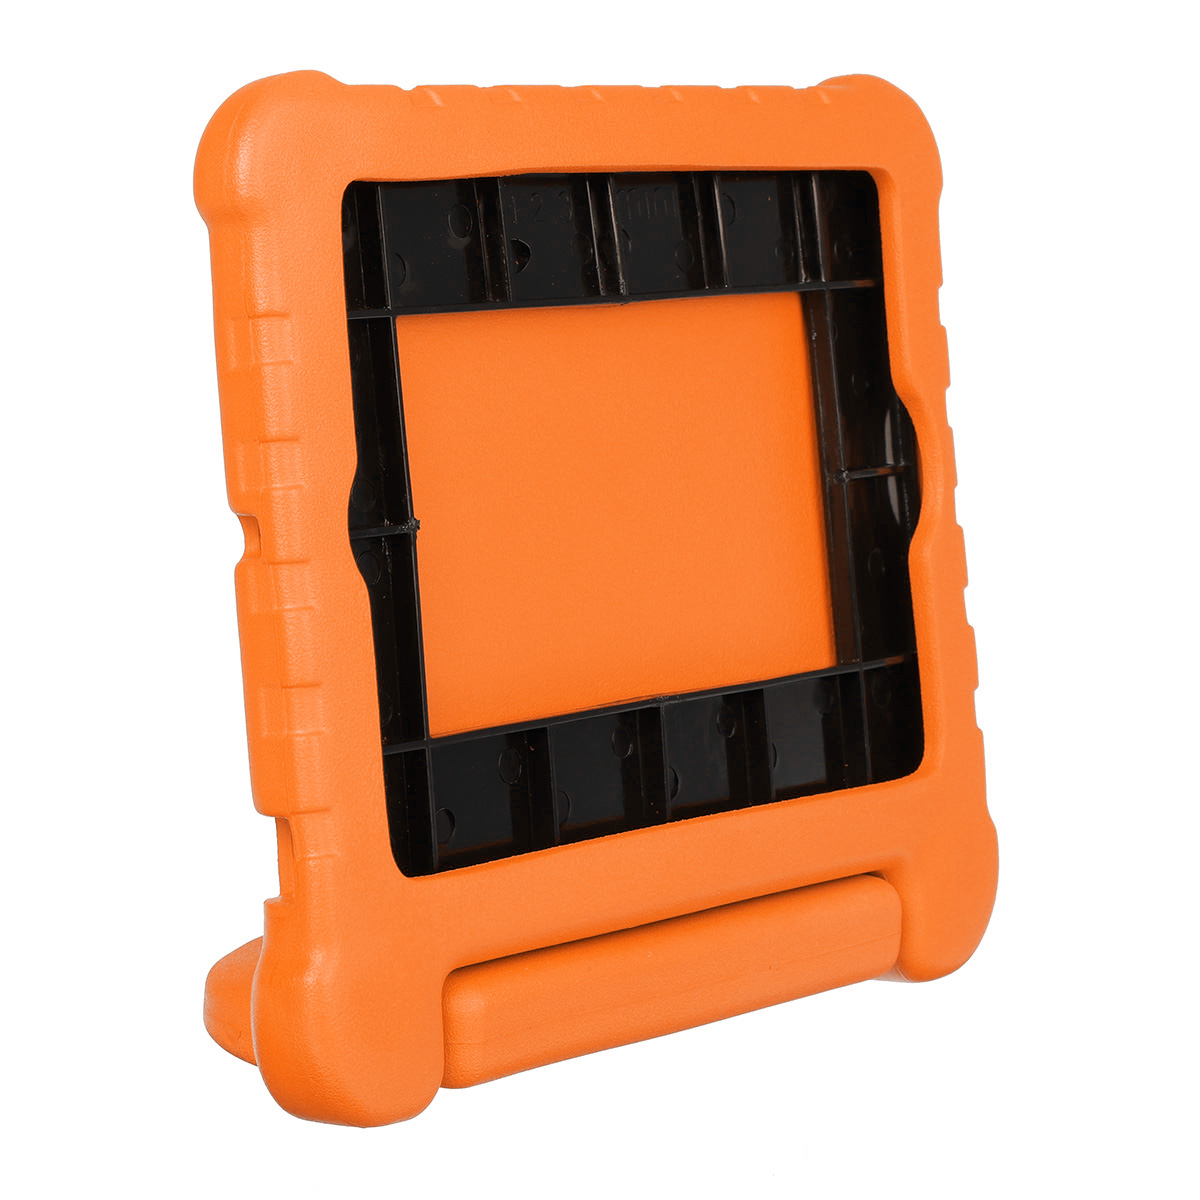 Portable-Kids-Friendly-Safe-EVA-with-Handle-Bracket-Stand-Tablet-Shockproof-Protective-Case-for-iPad-1777875-4